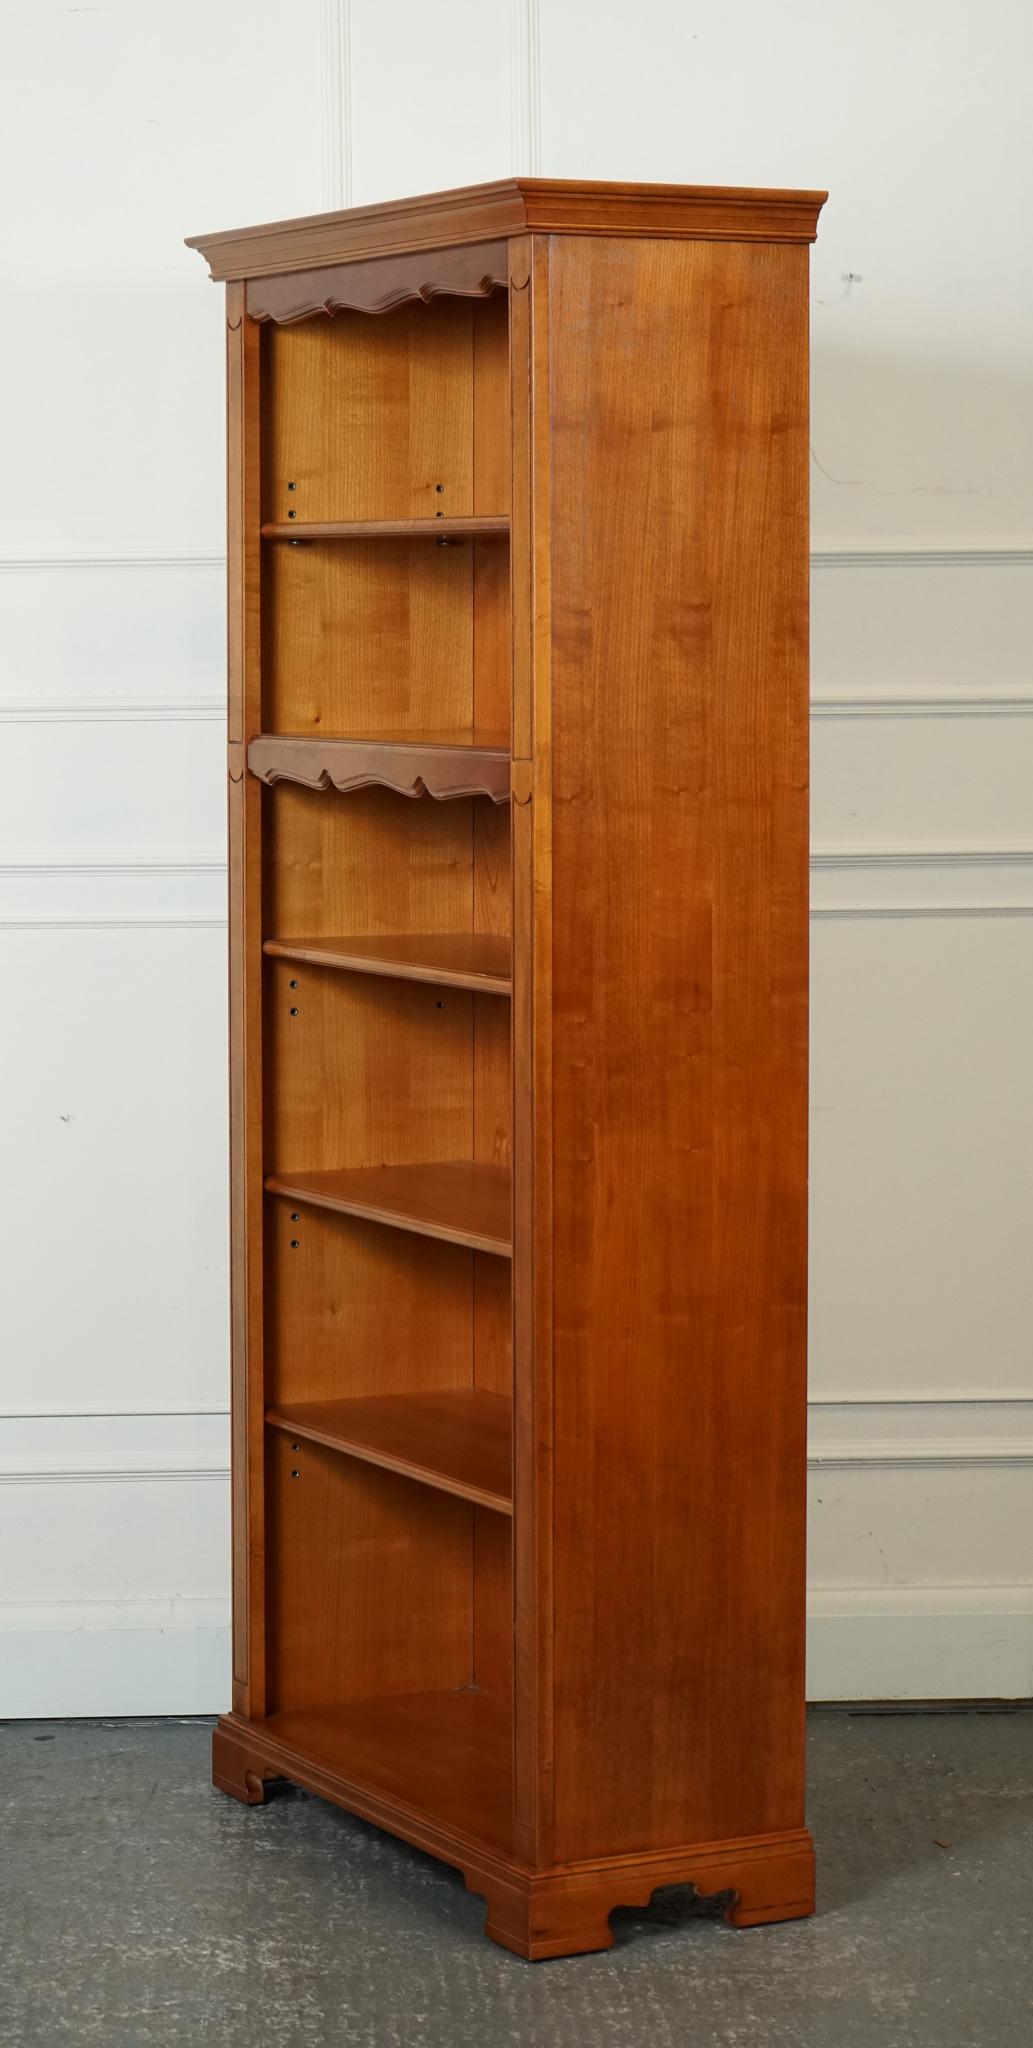 VINTAGE TALL OPEN SOLID BOOKCASE 5 SHELVES MADE BY YOUNGER FURNITURE LONDON j1 For Sale 4